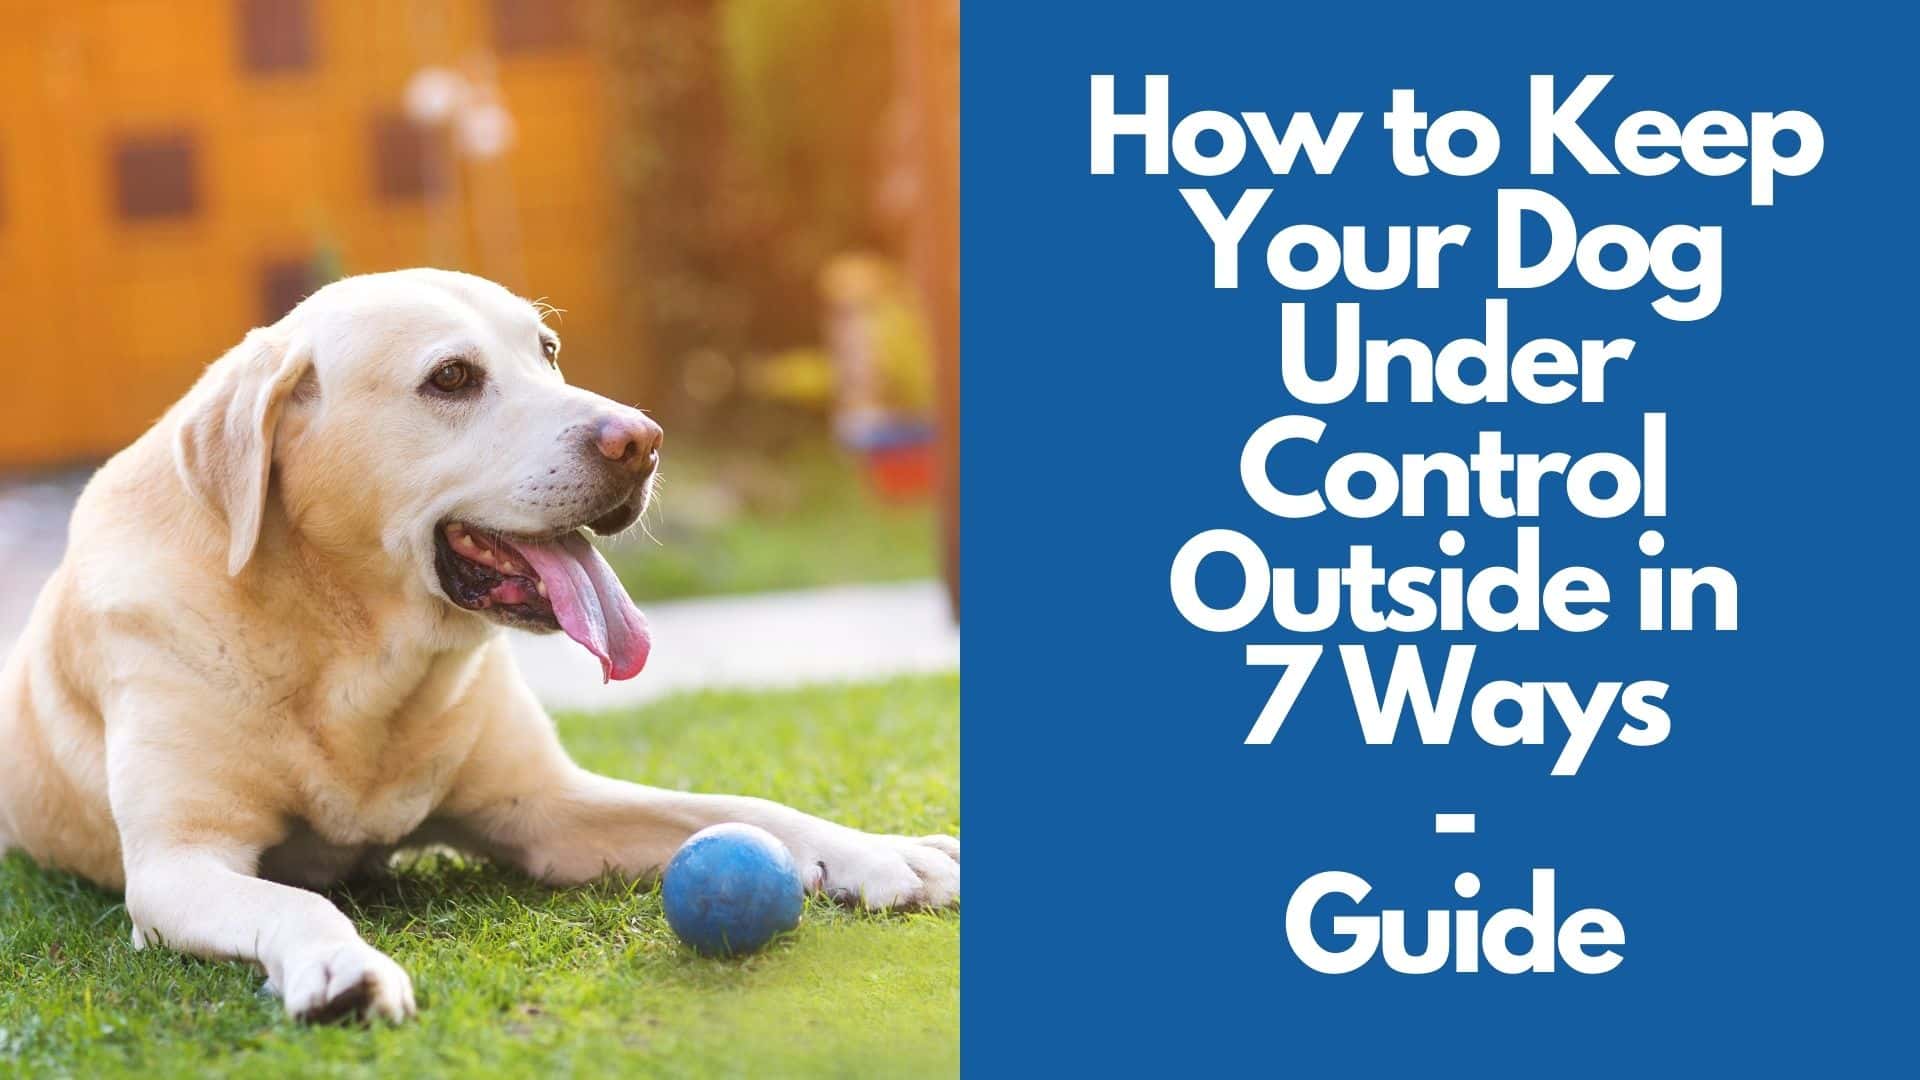 How to Keep Your Dog Under Control Outside in 7 Ways  Guide